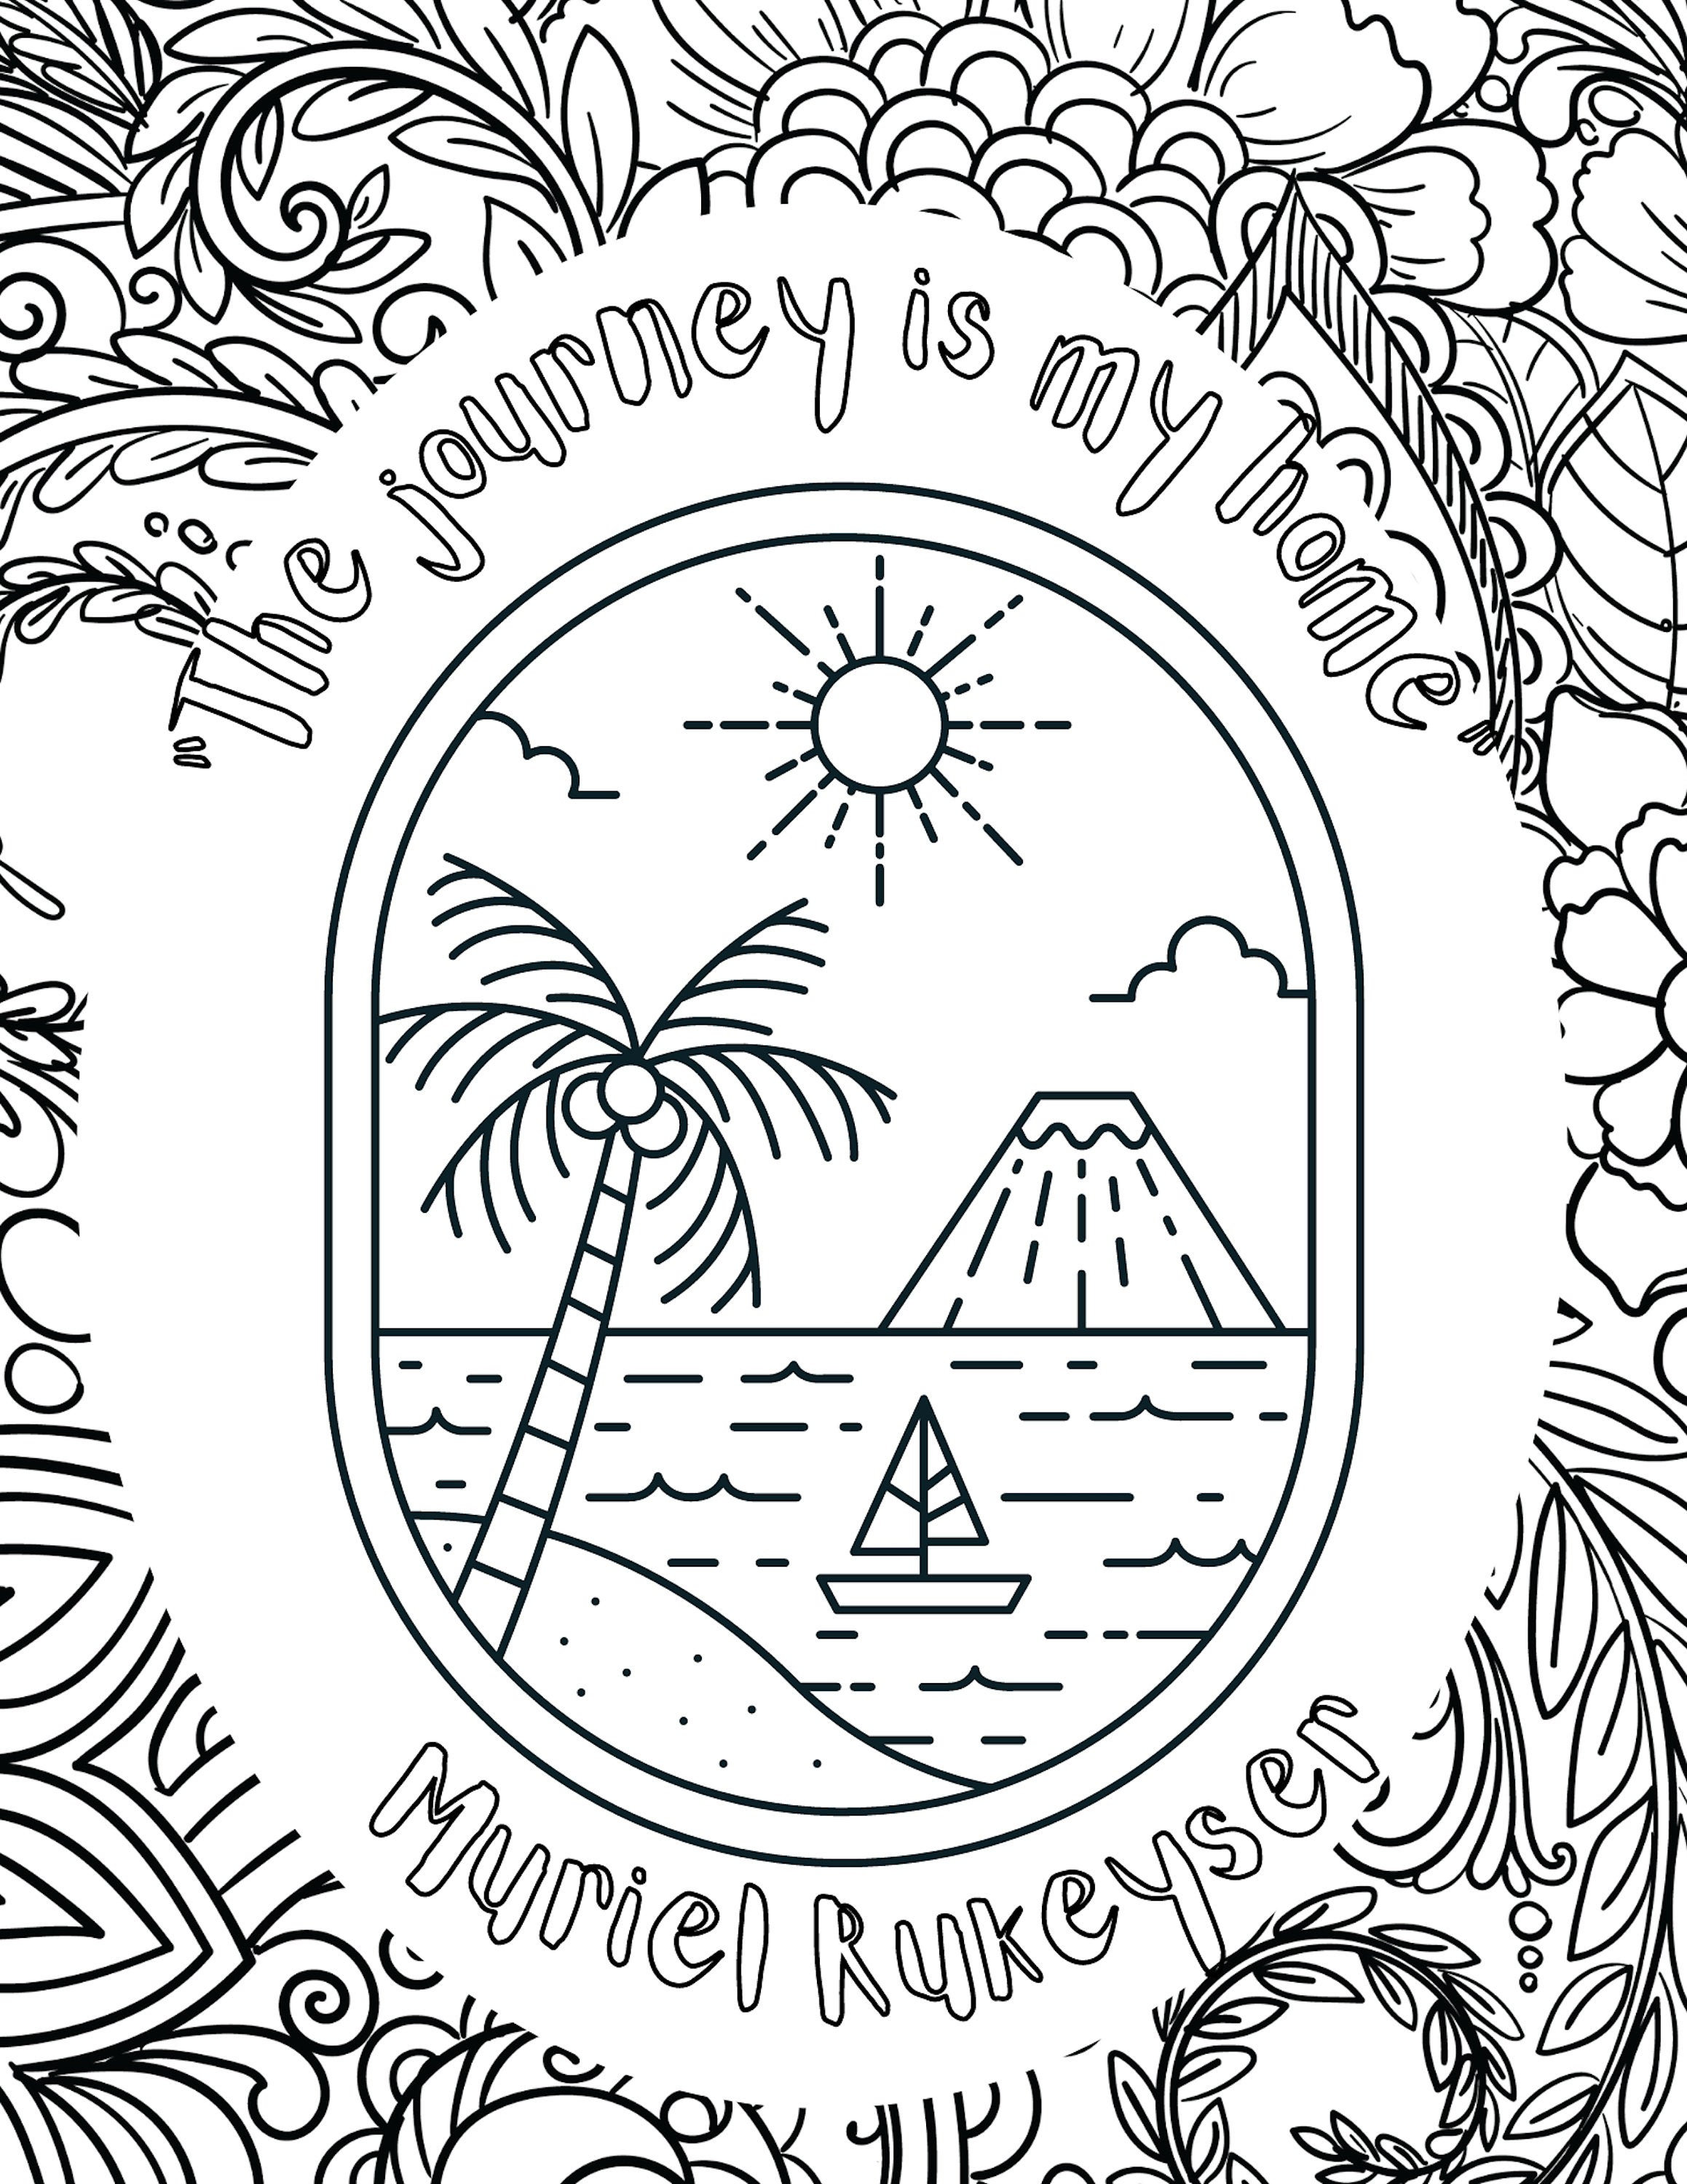 colouring pages travel